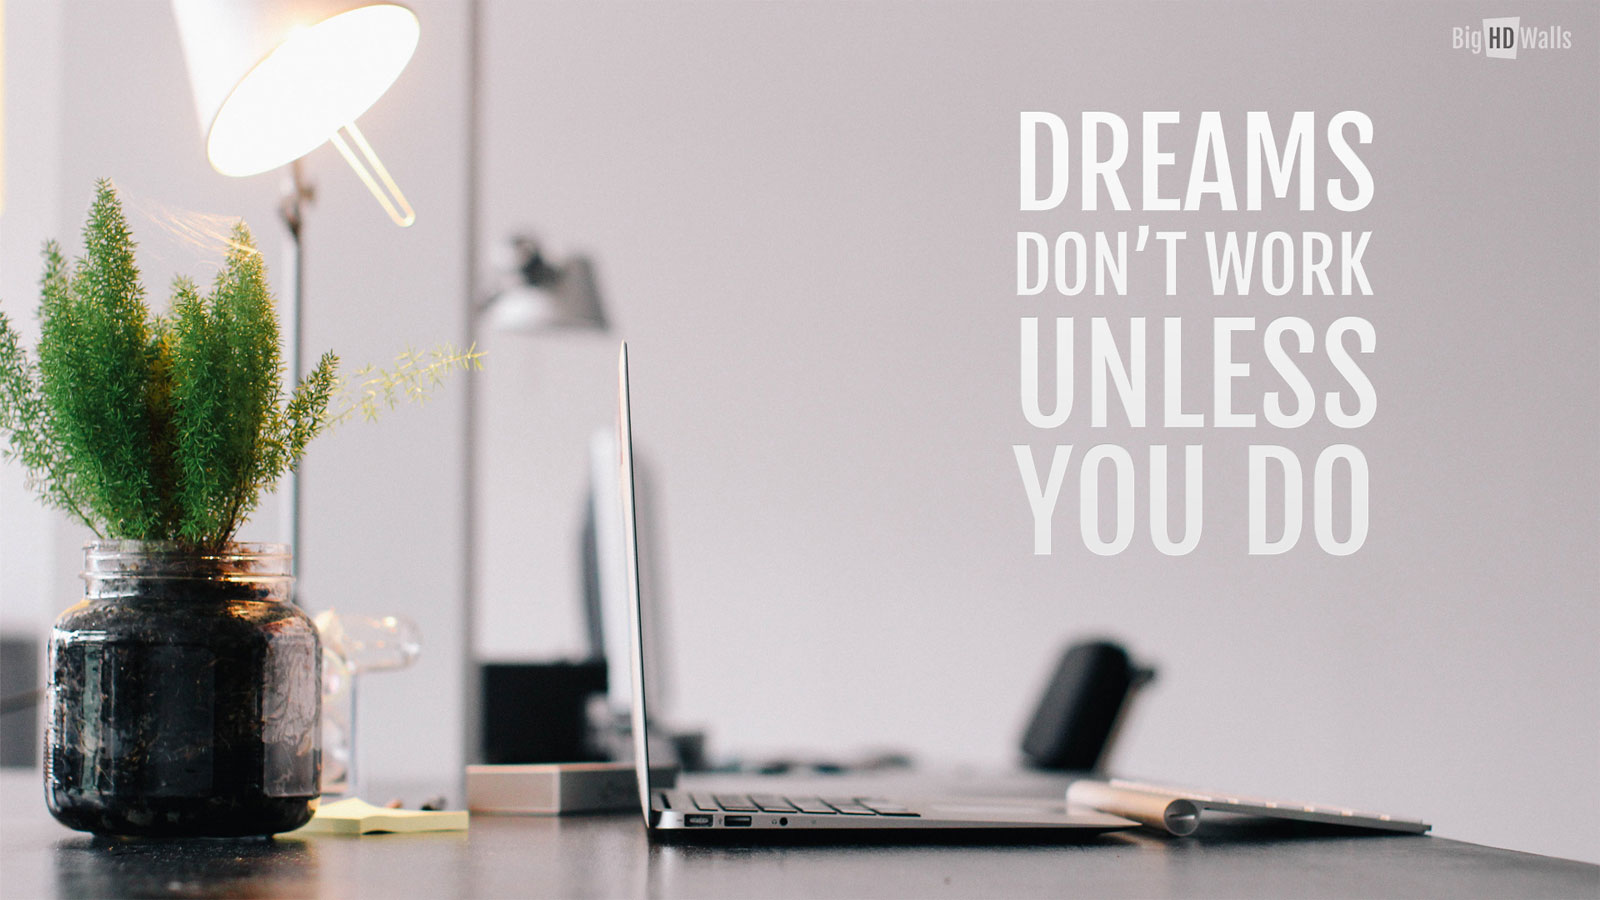 Work 115 Best Motivational Wallpaper Examples with Inspiring Quotes